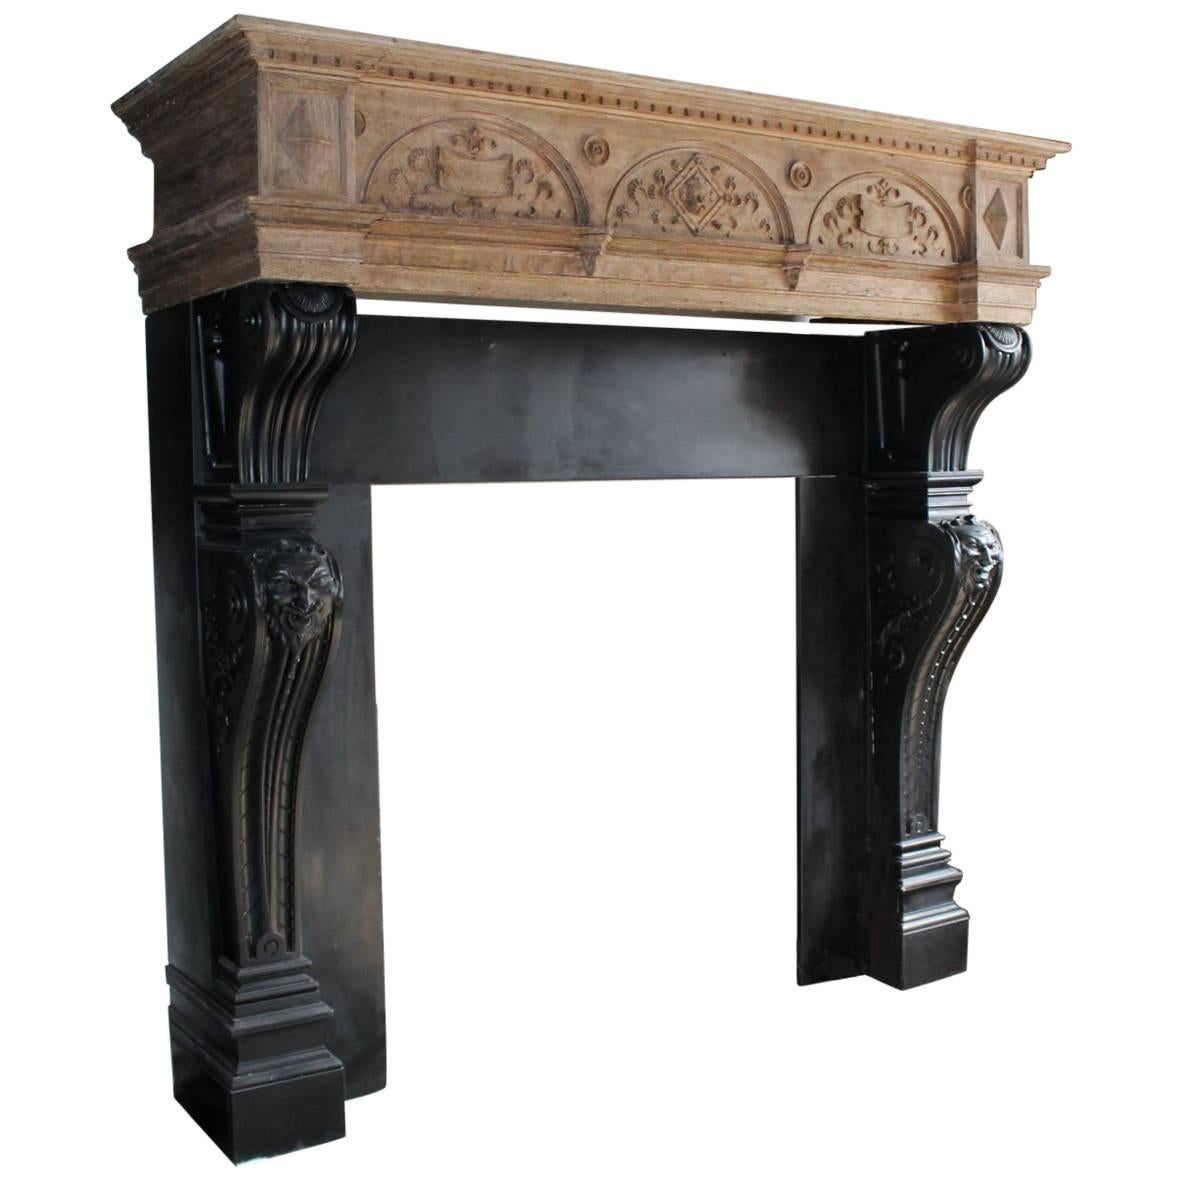 Antique Marble Fireplace with a Wooden Mantel on Top